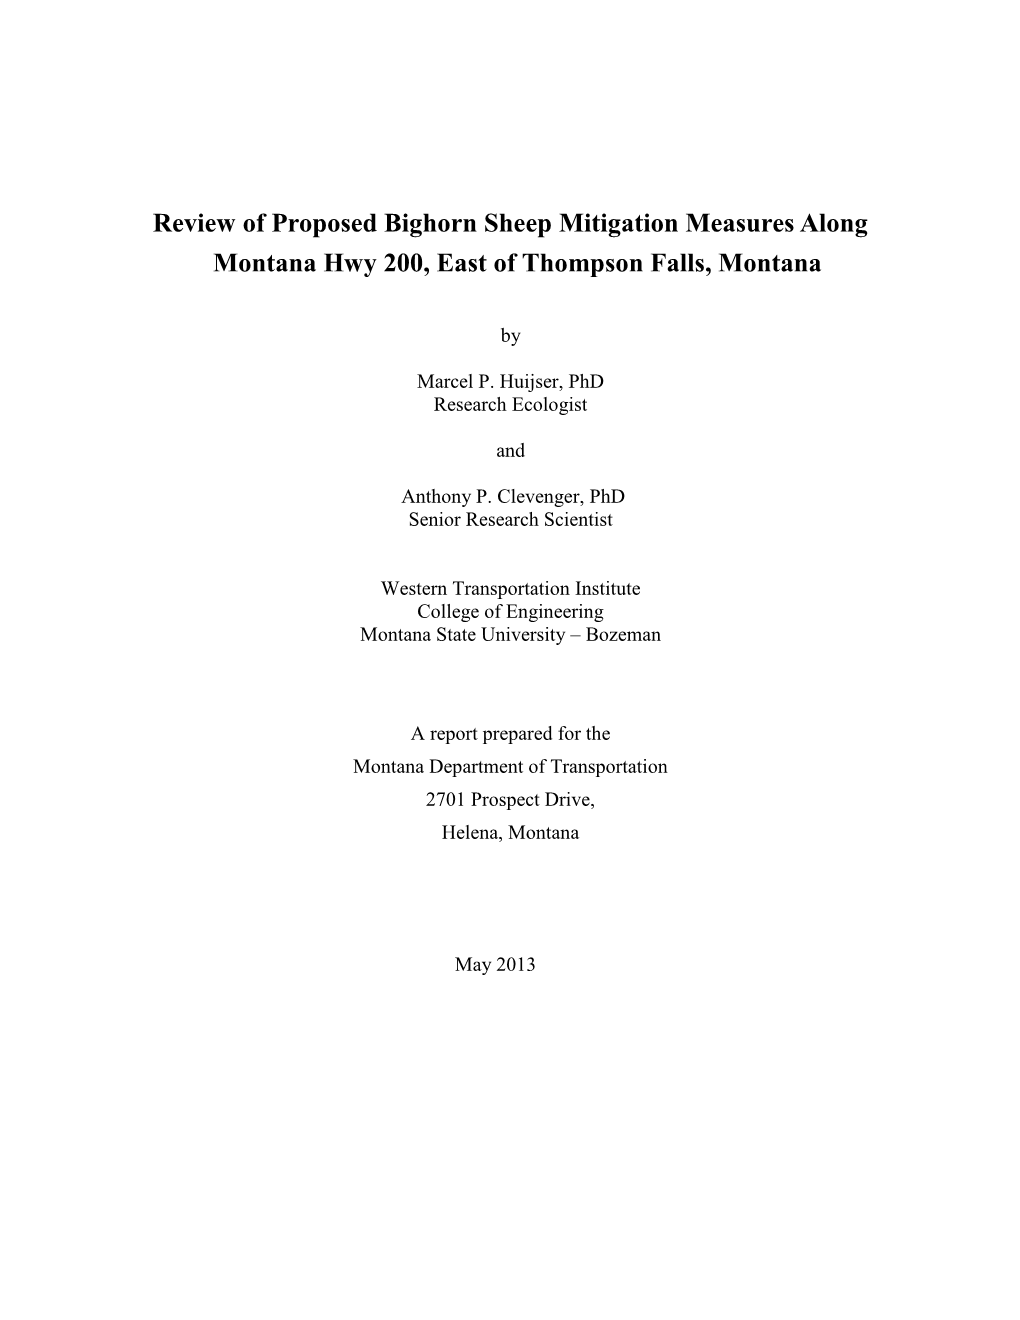 Review of Proposed Bighorn Sheep Mitigation Measures Along Montana Hwy 200, East of Thompson Falls, Montana